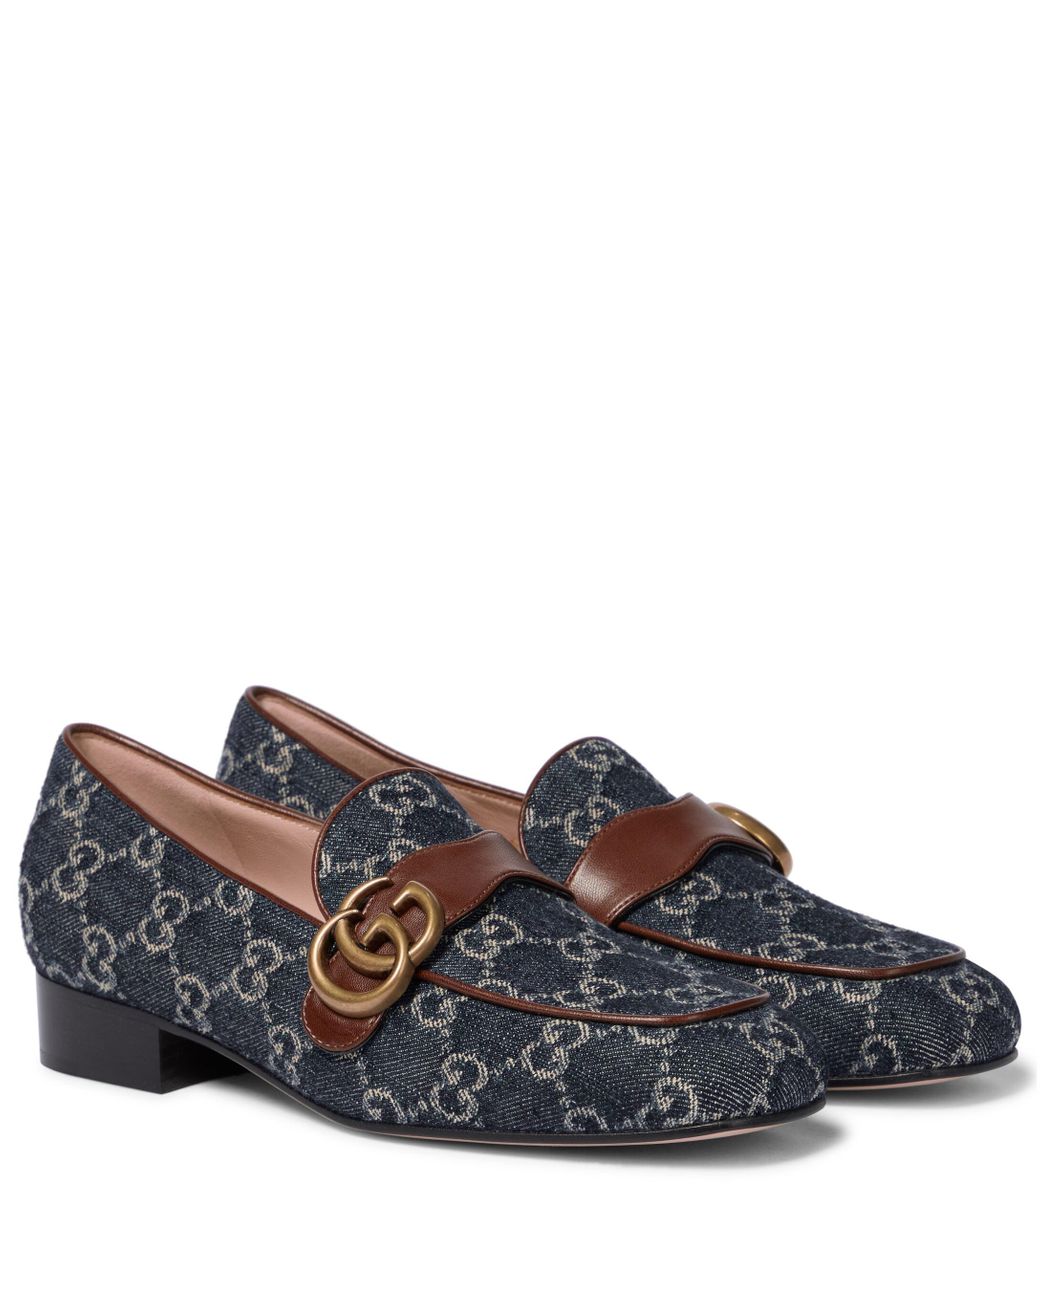 Gucci GG Marmont Denim Loafers in Blue | Lyst